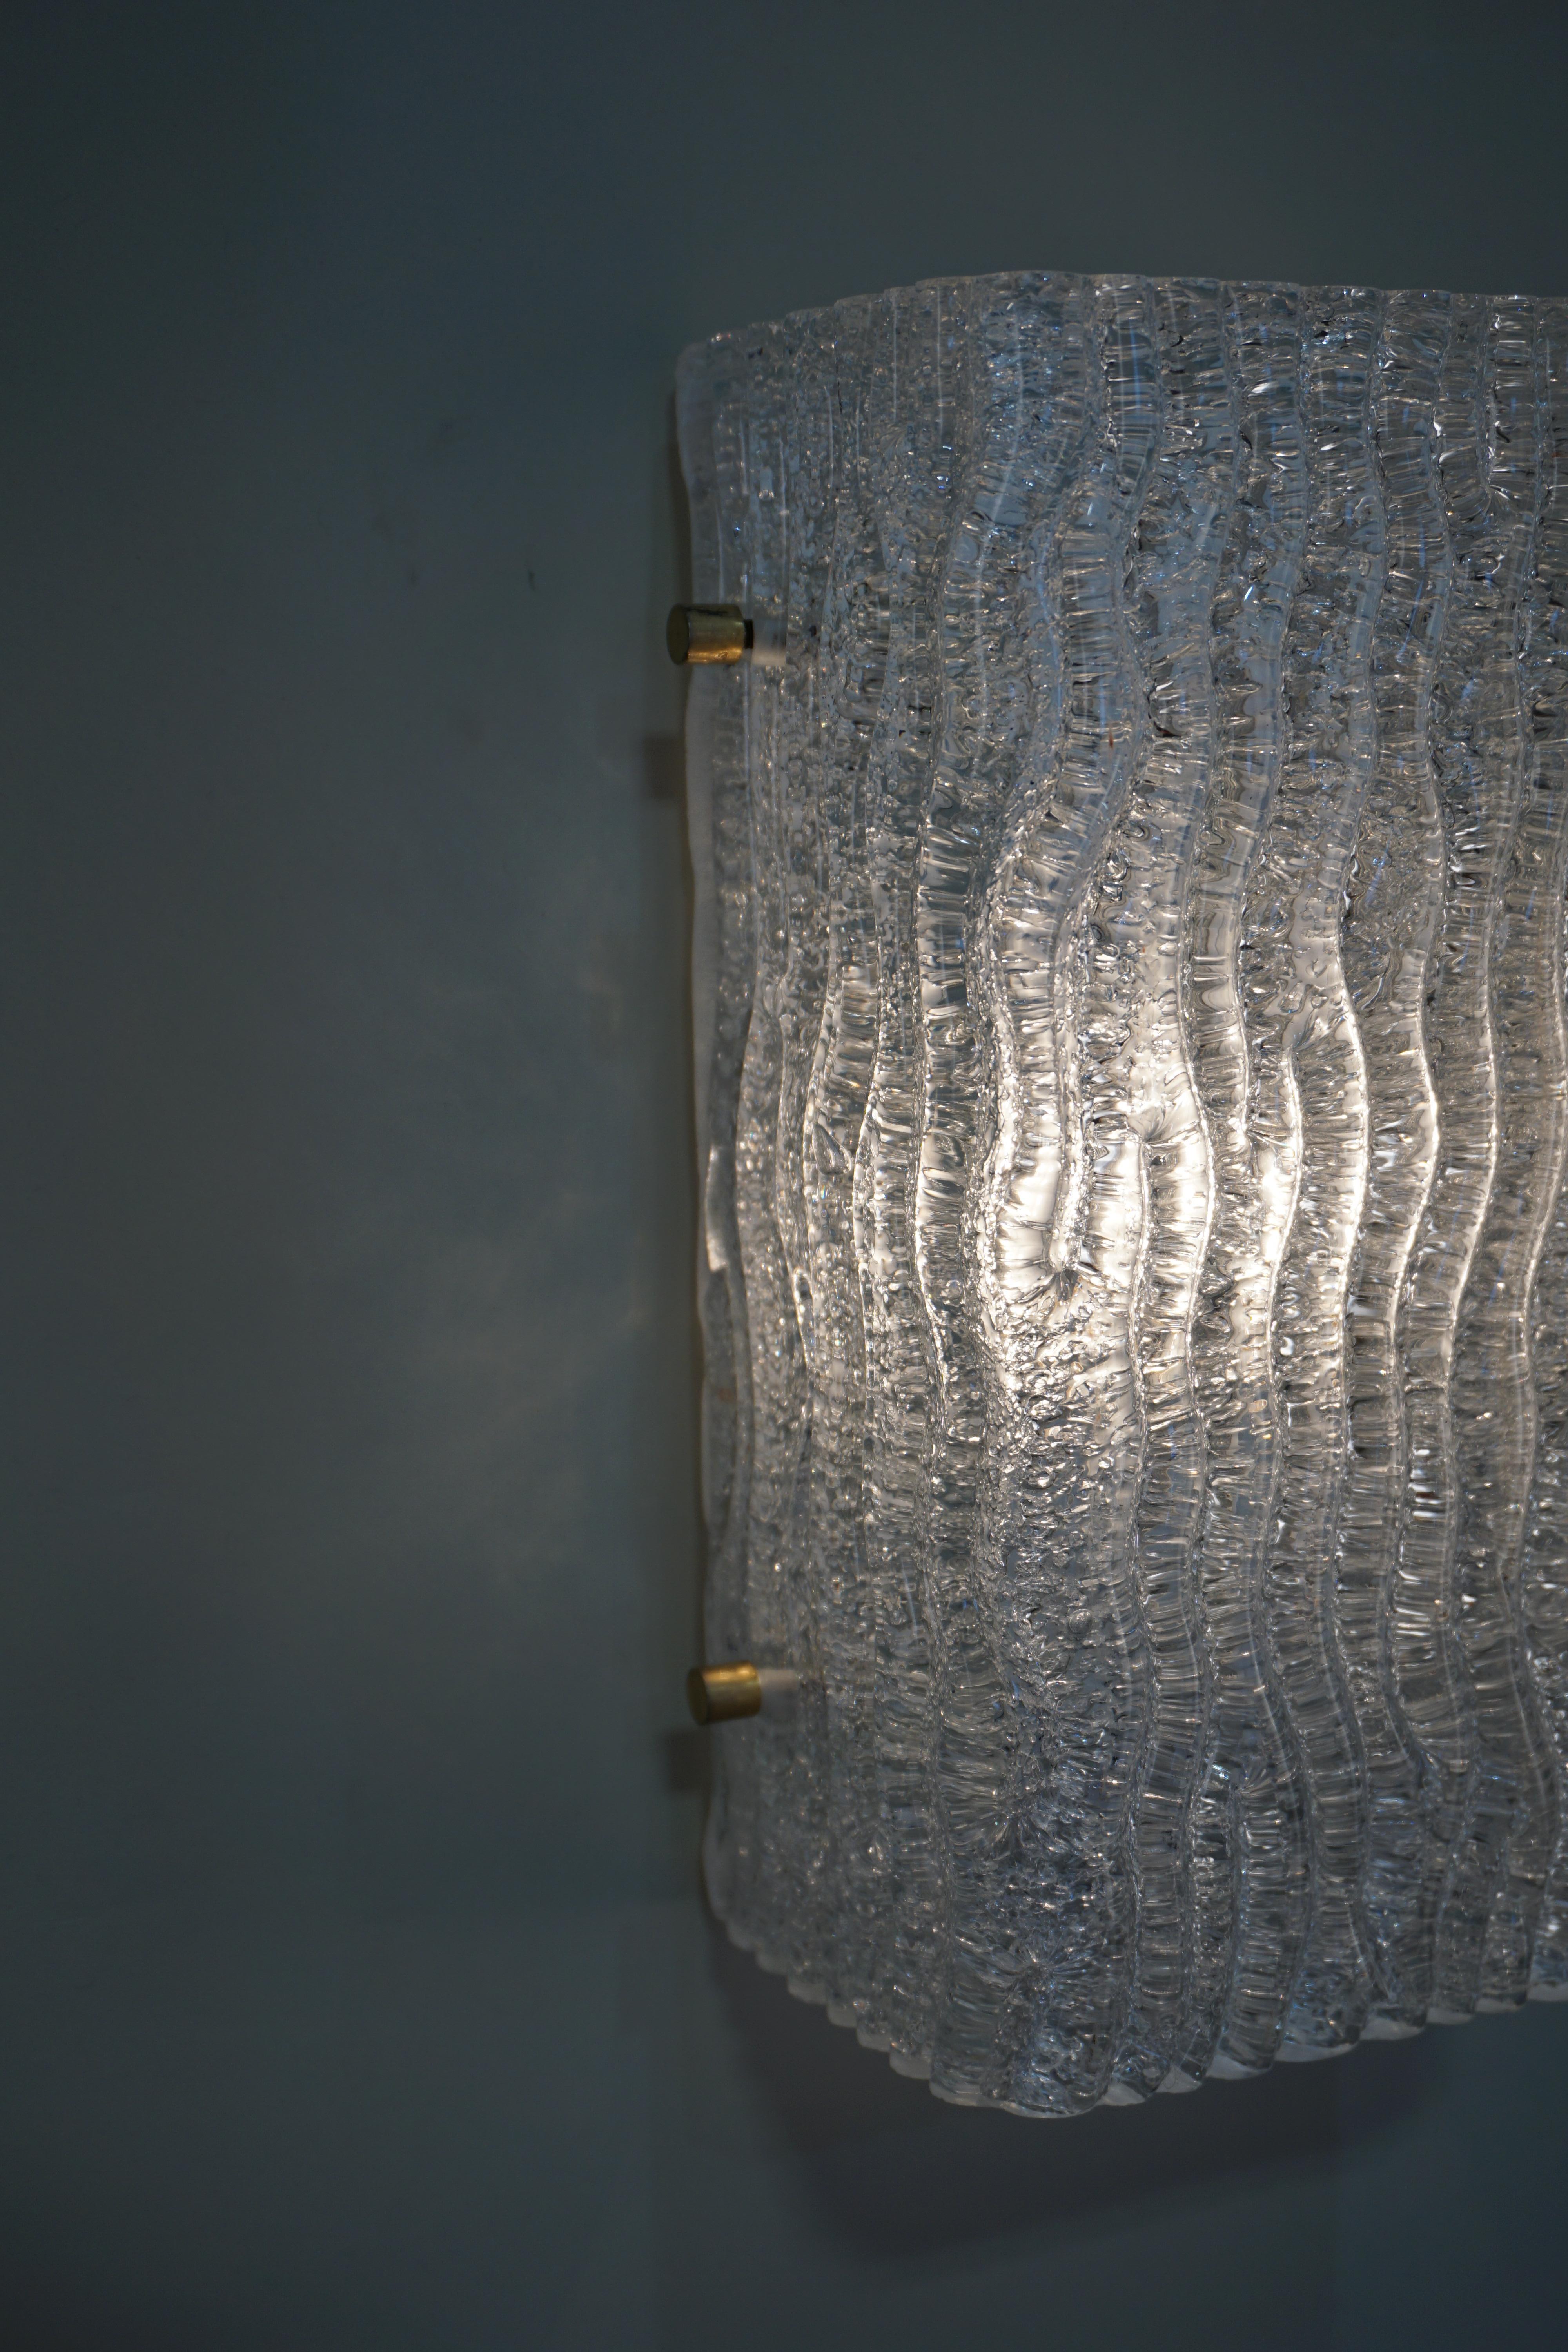 French 1970s texture glass wall sconces by Maison Arlus.
Backplate is 3